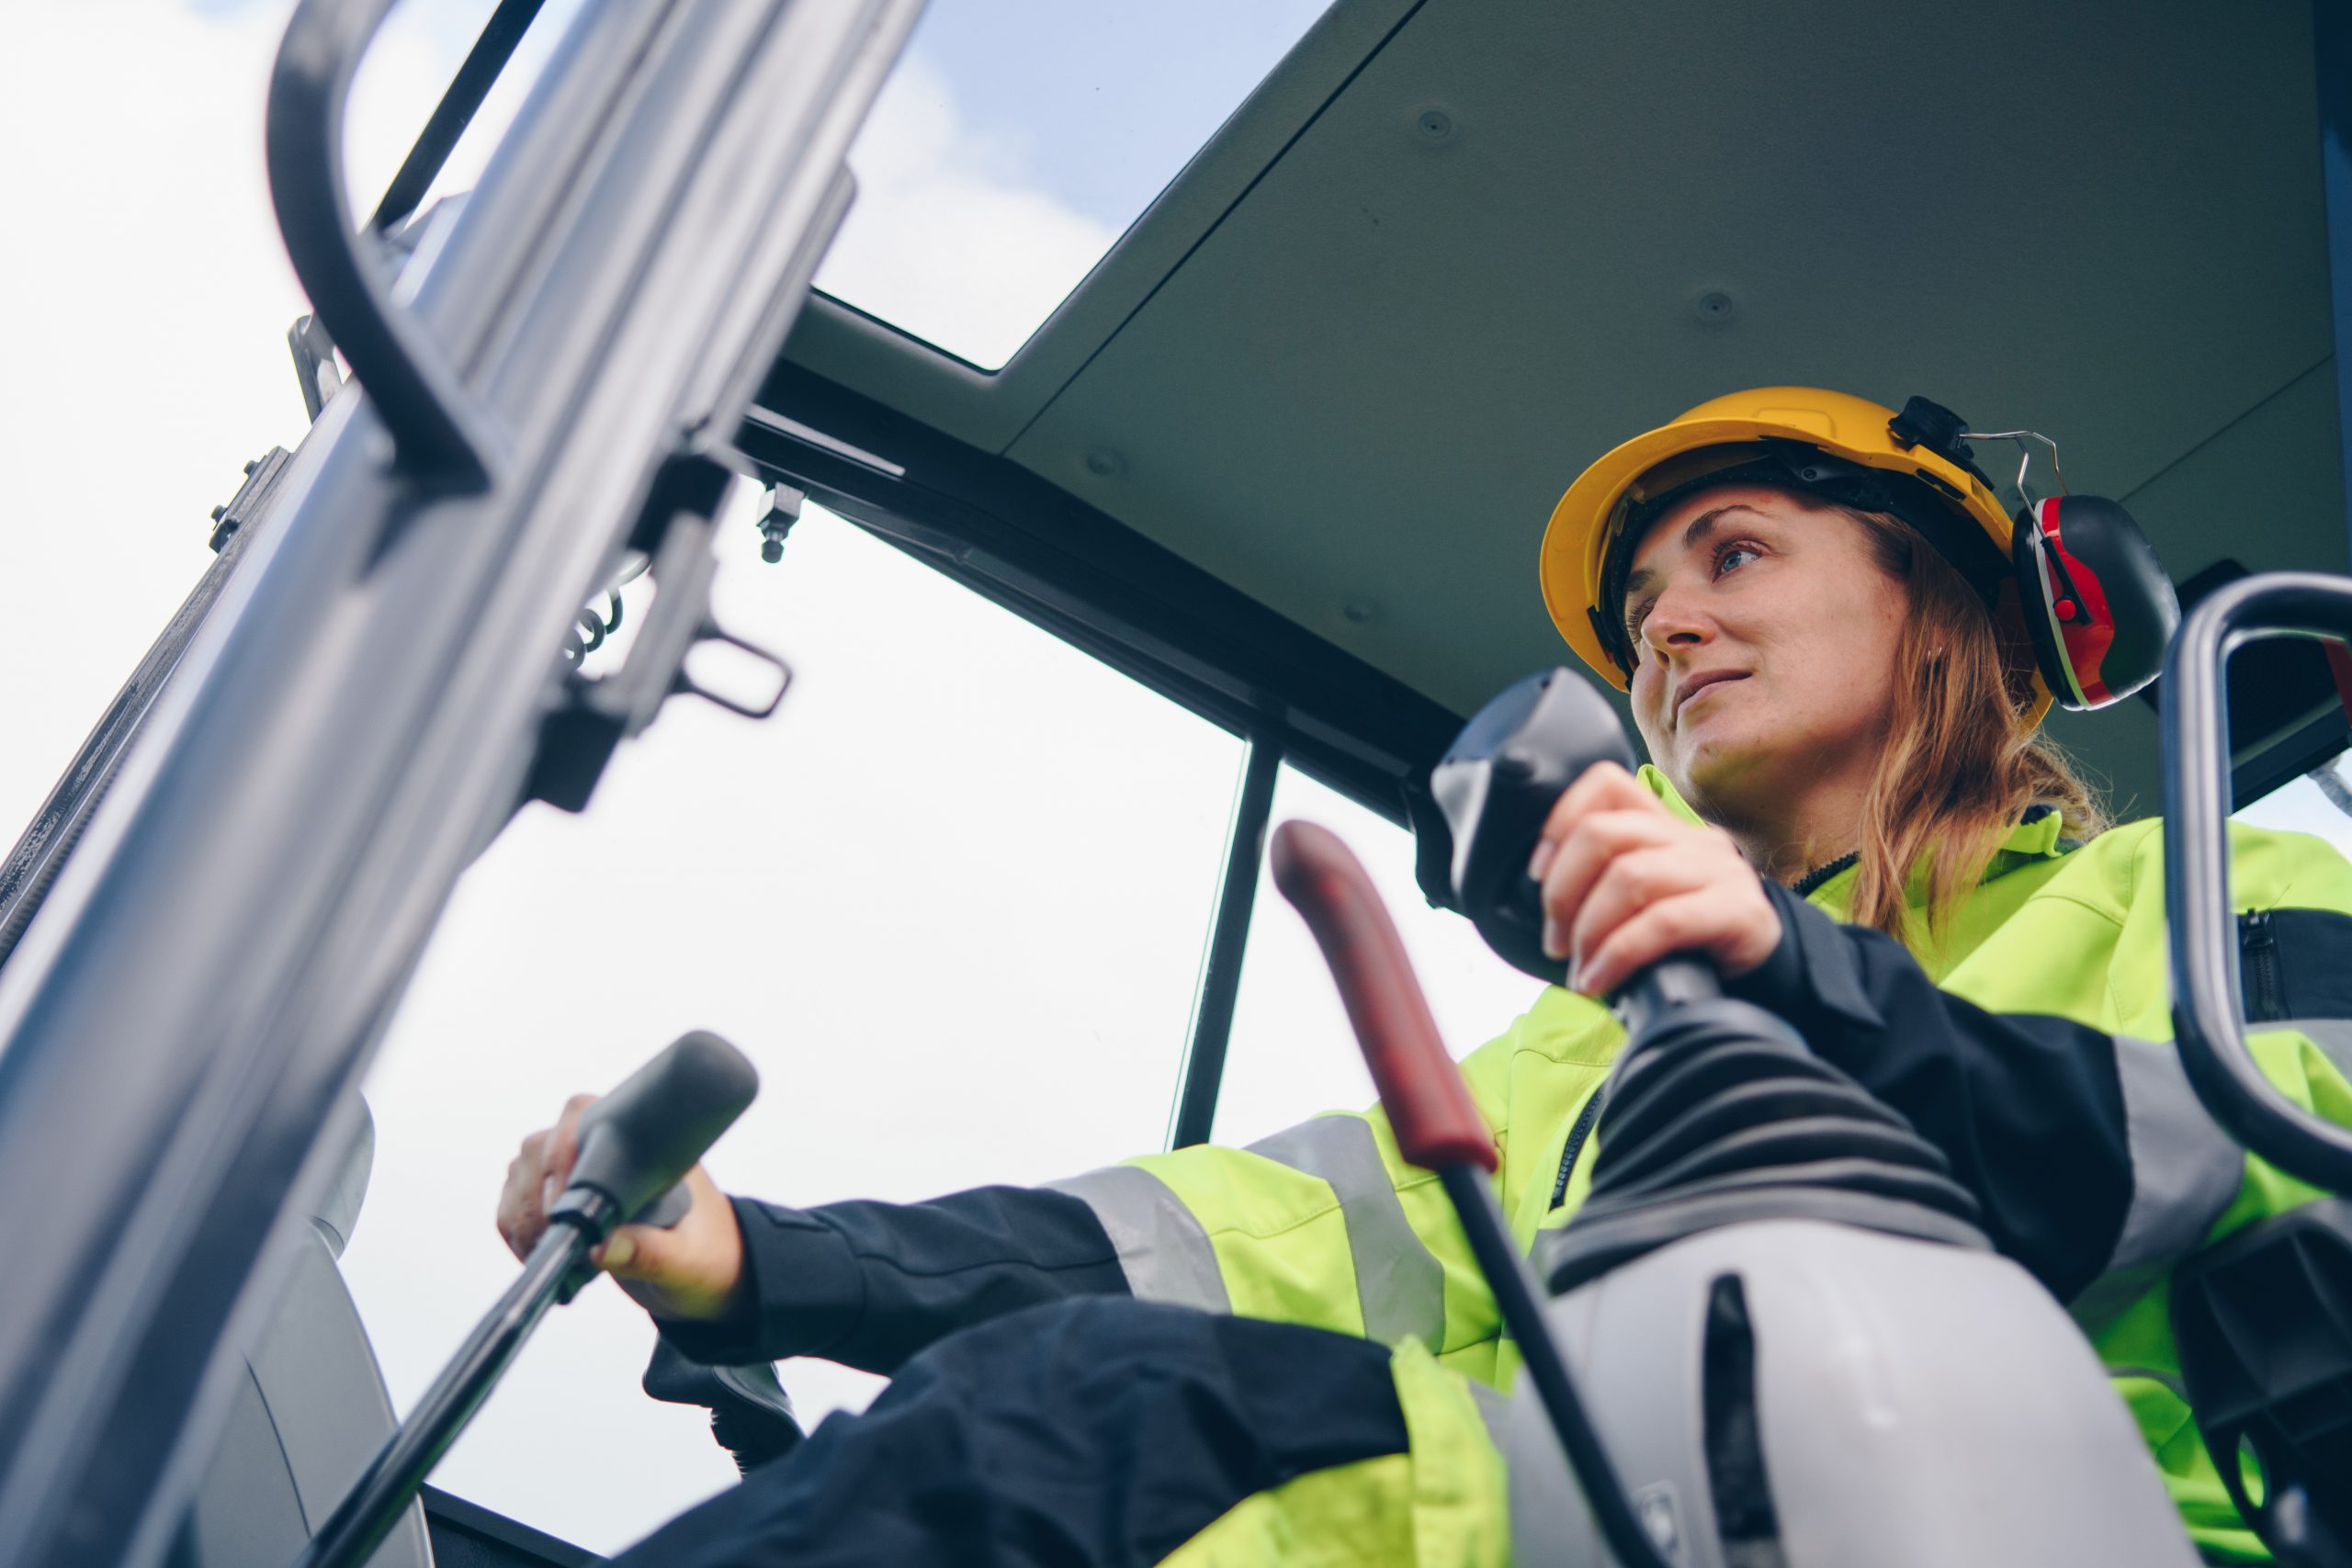 An image of a woman driving heavy equipment